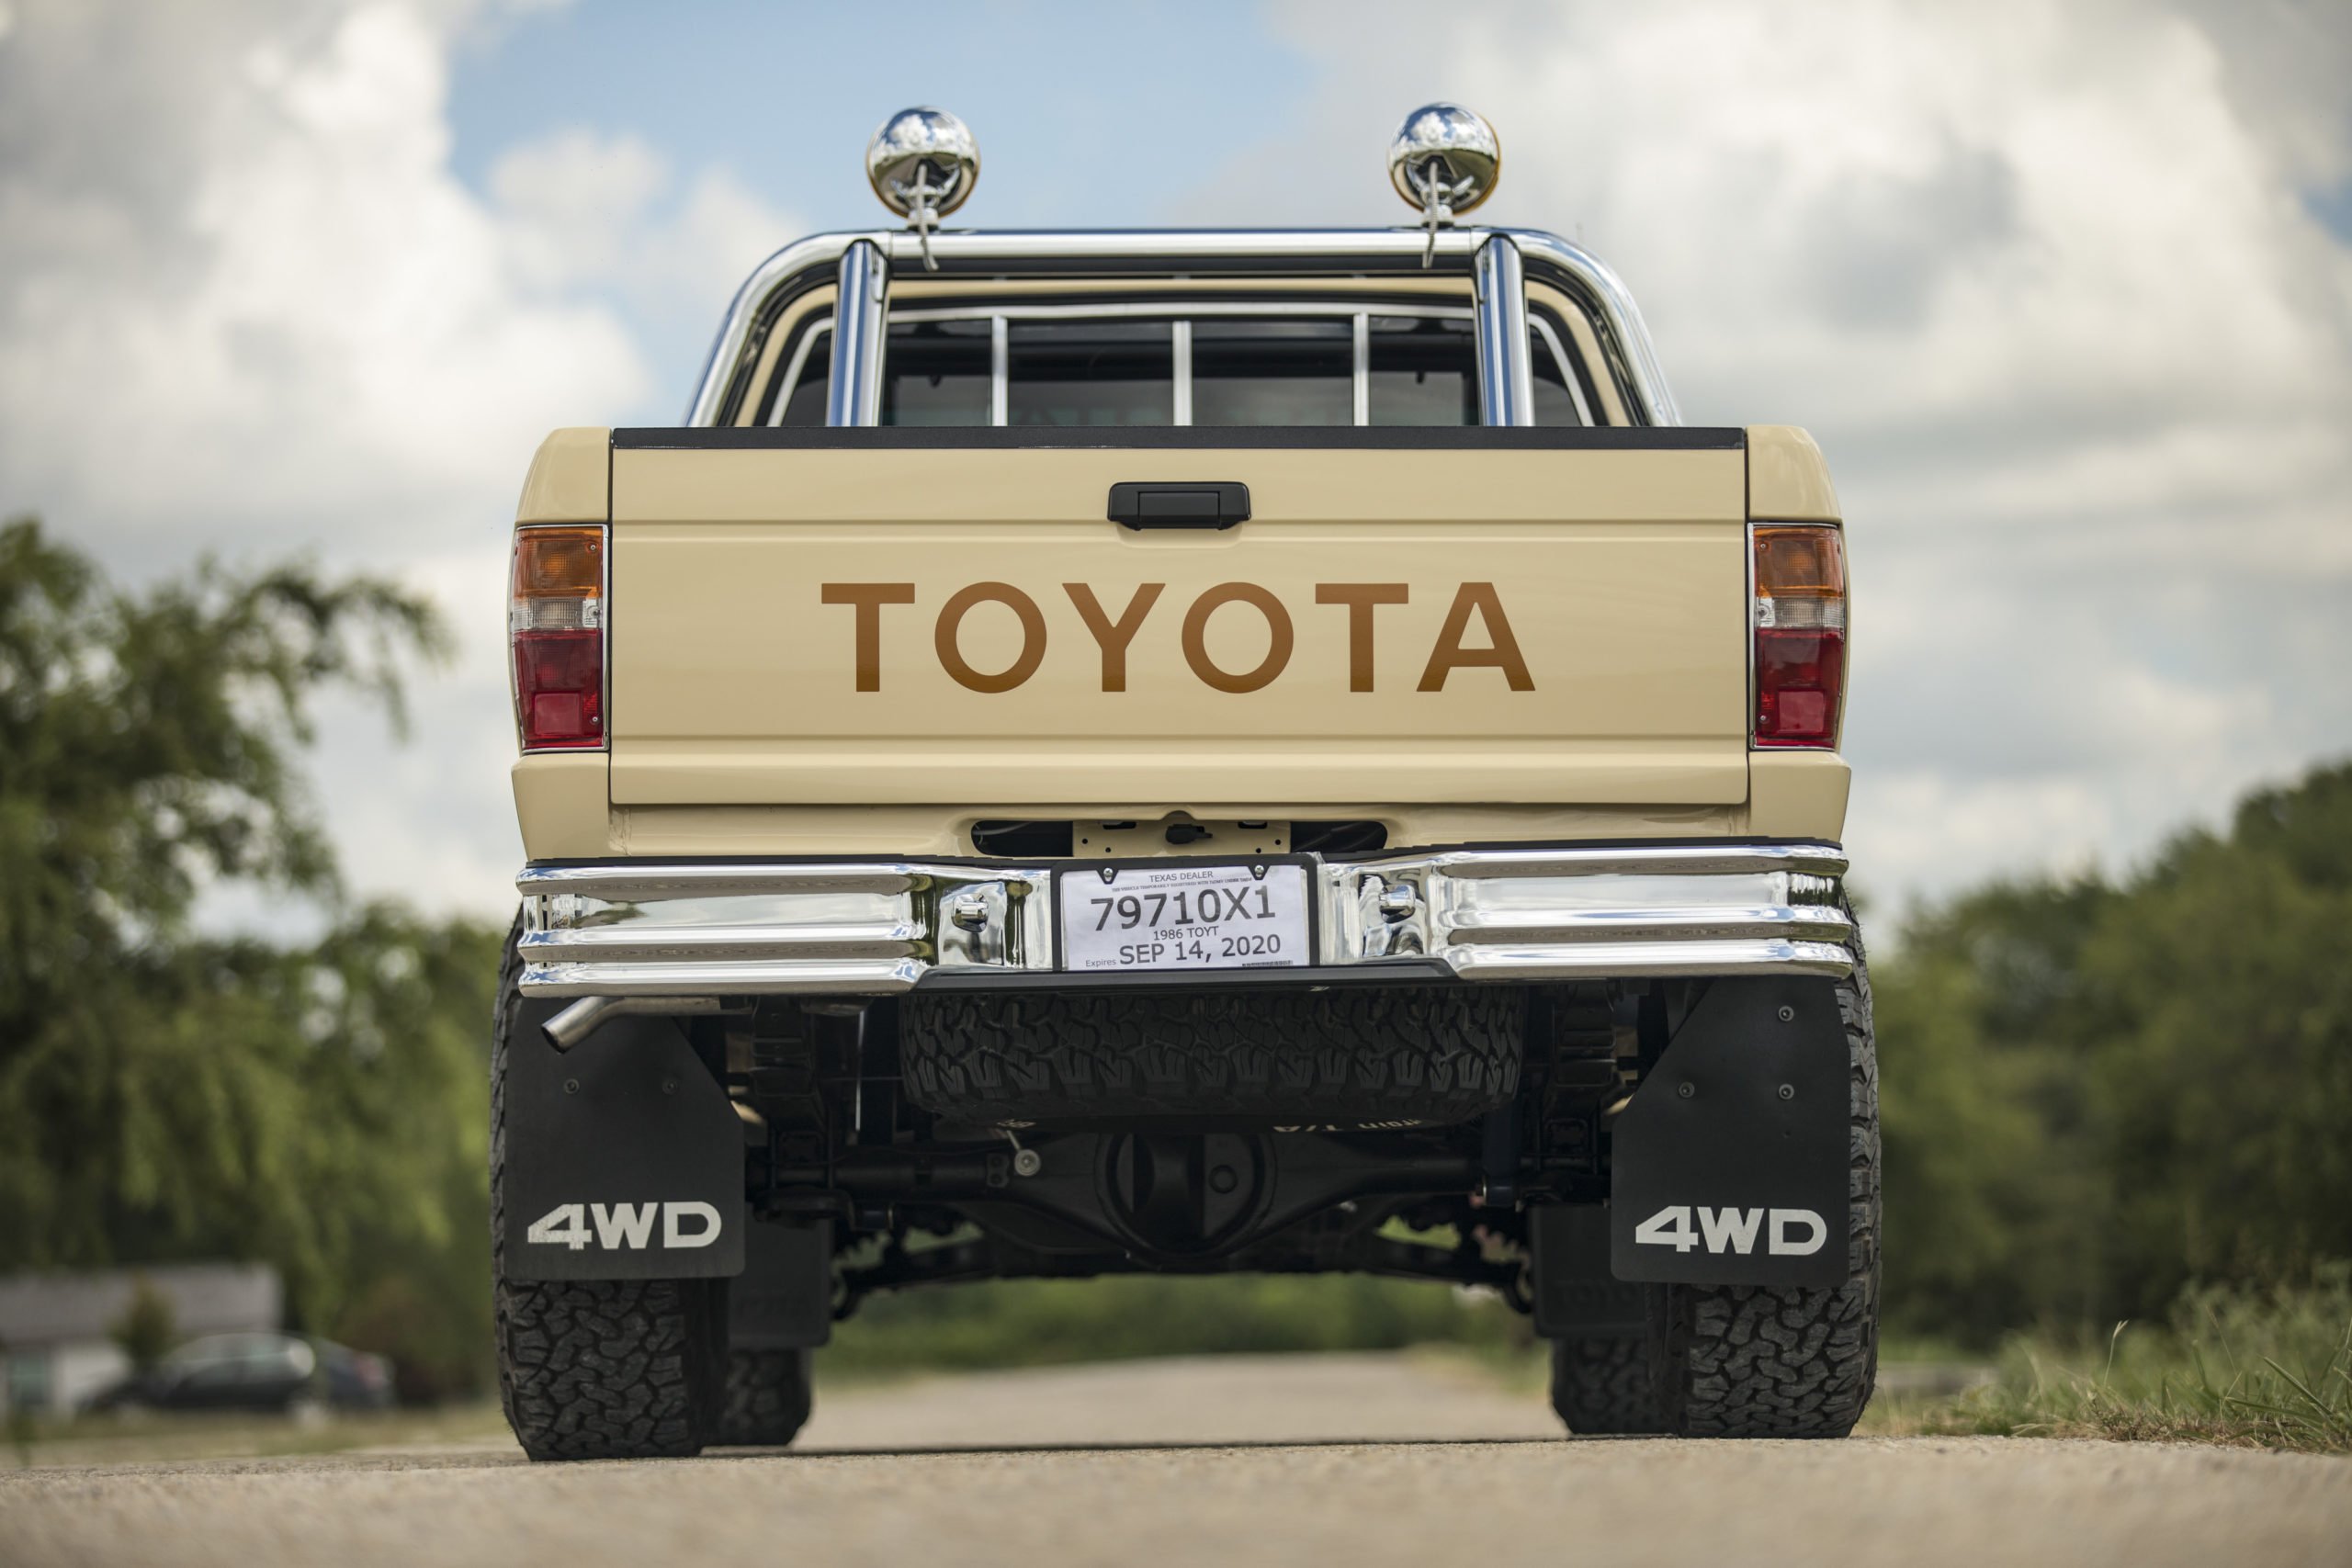 The Fourth-Generation Toyota 4×4 Pickup - The Indestructible Hilux